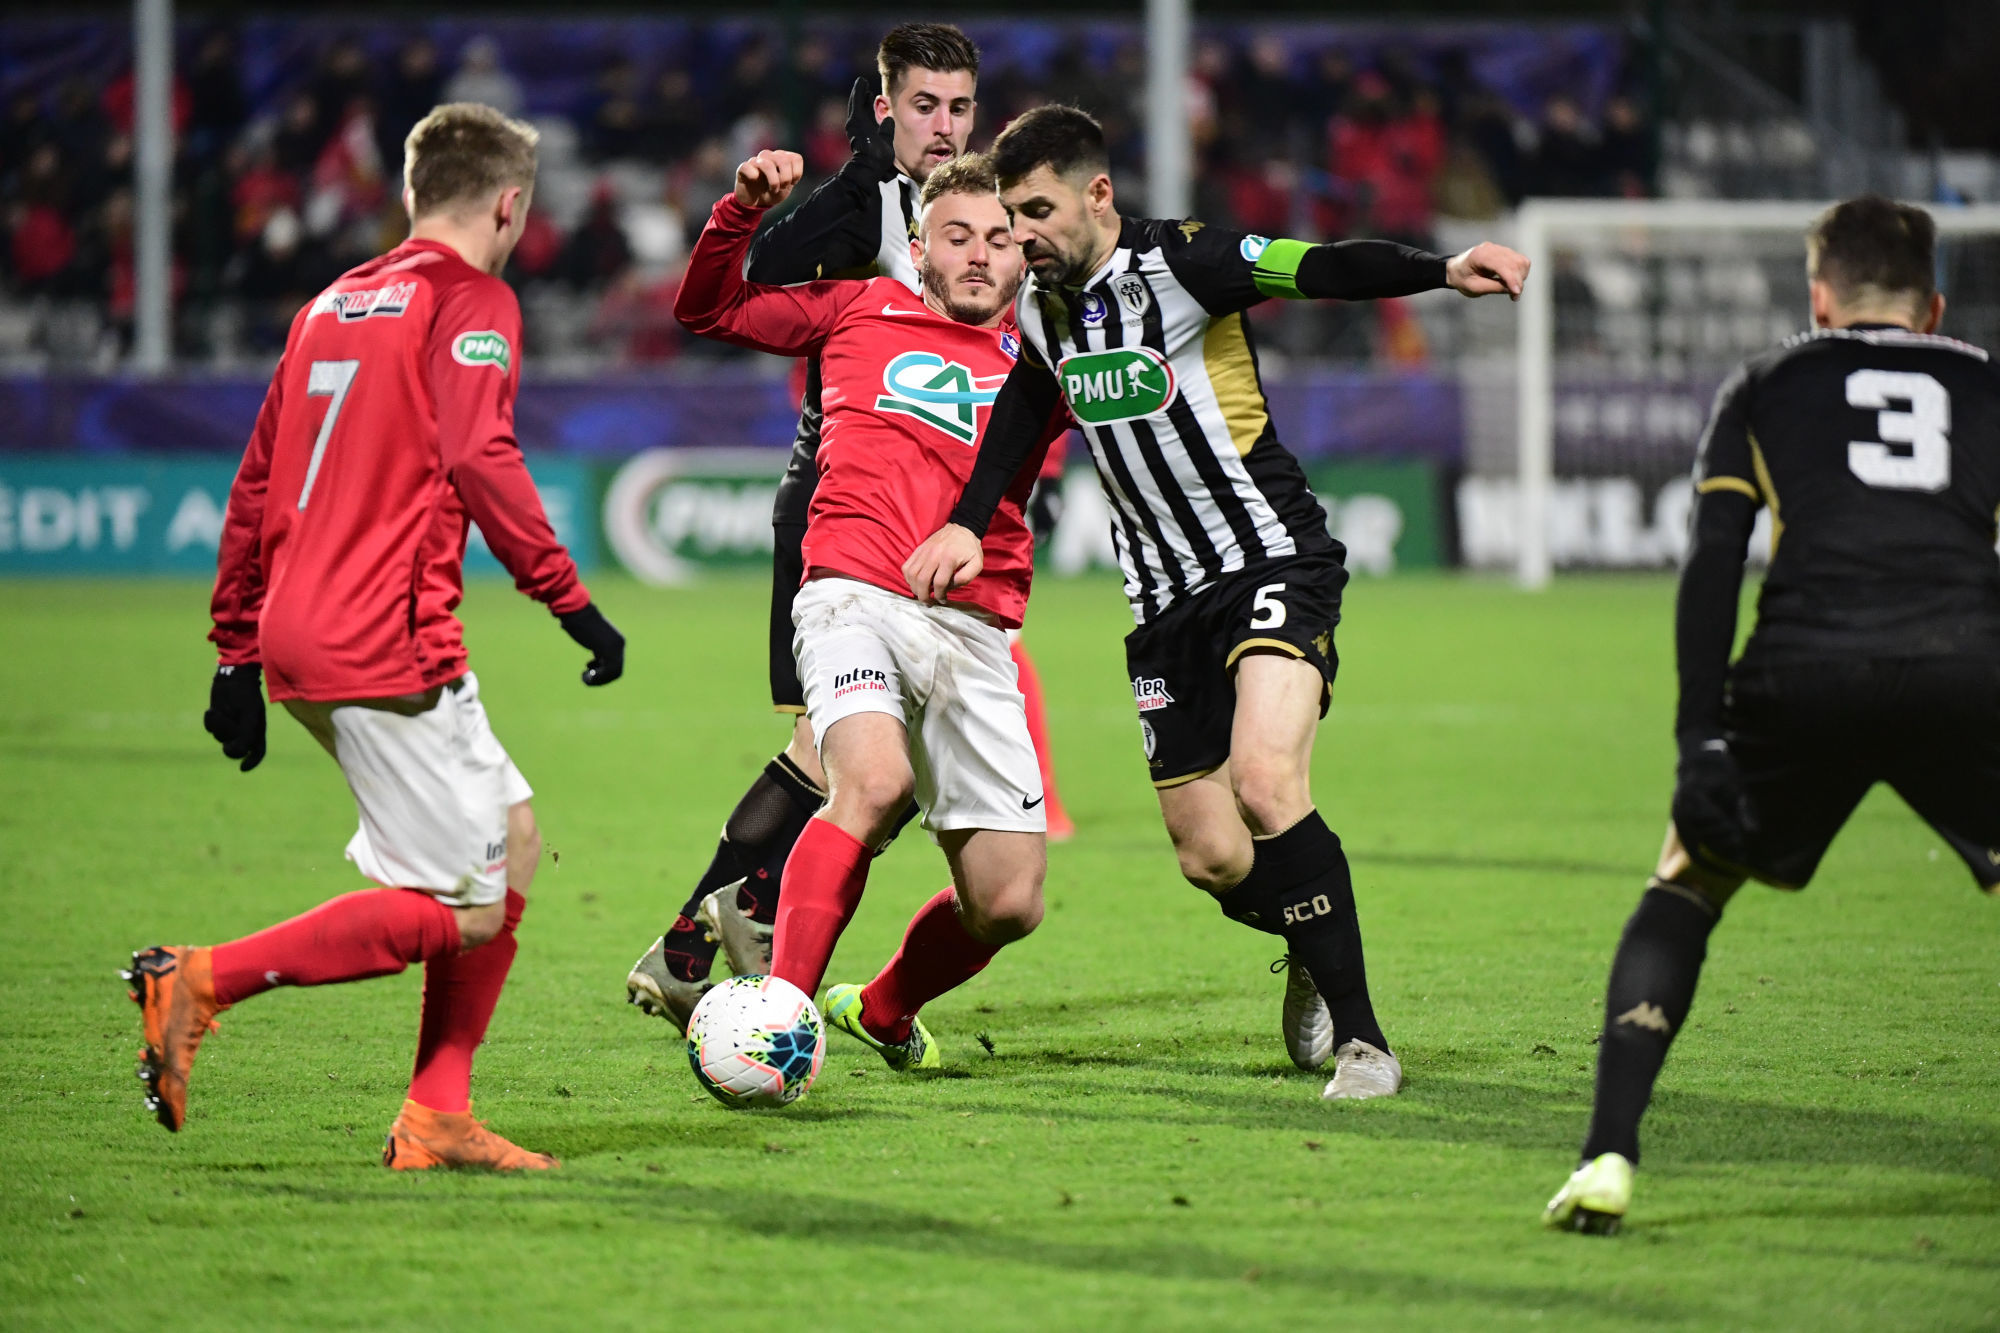 (L-R) Anthony ROGIE of Rouen  and Vincent MANCEAU of Angers during the French Cup match between FC Rouen and Angers on January 19, 2020 in Rouen, France. (Photo by Dave Winter/Icon Sport)